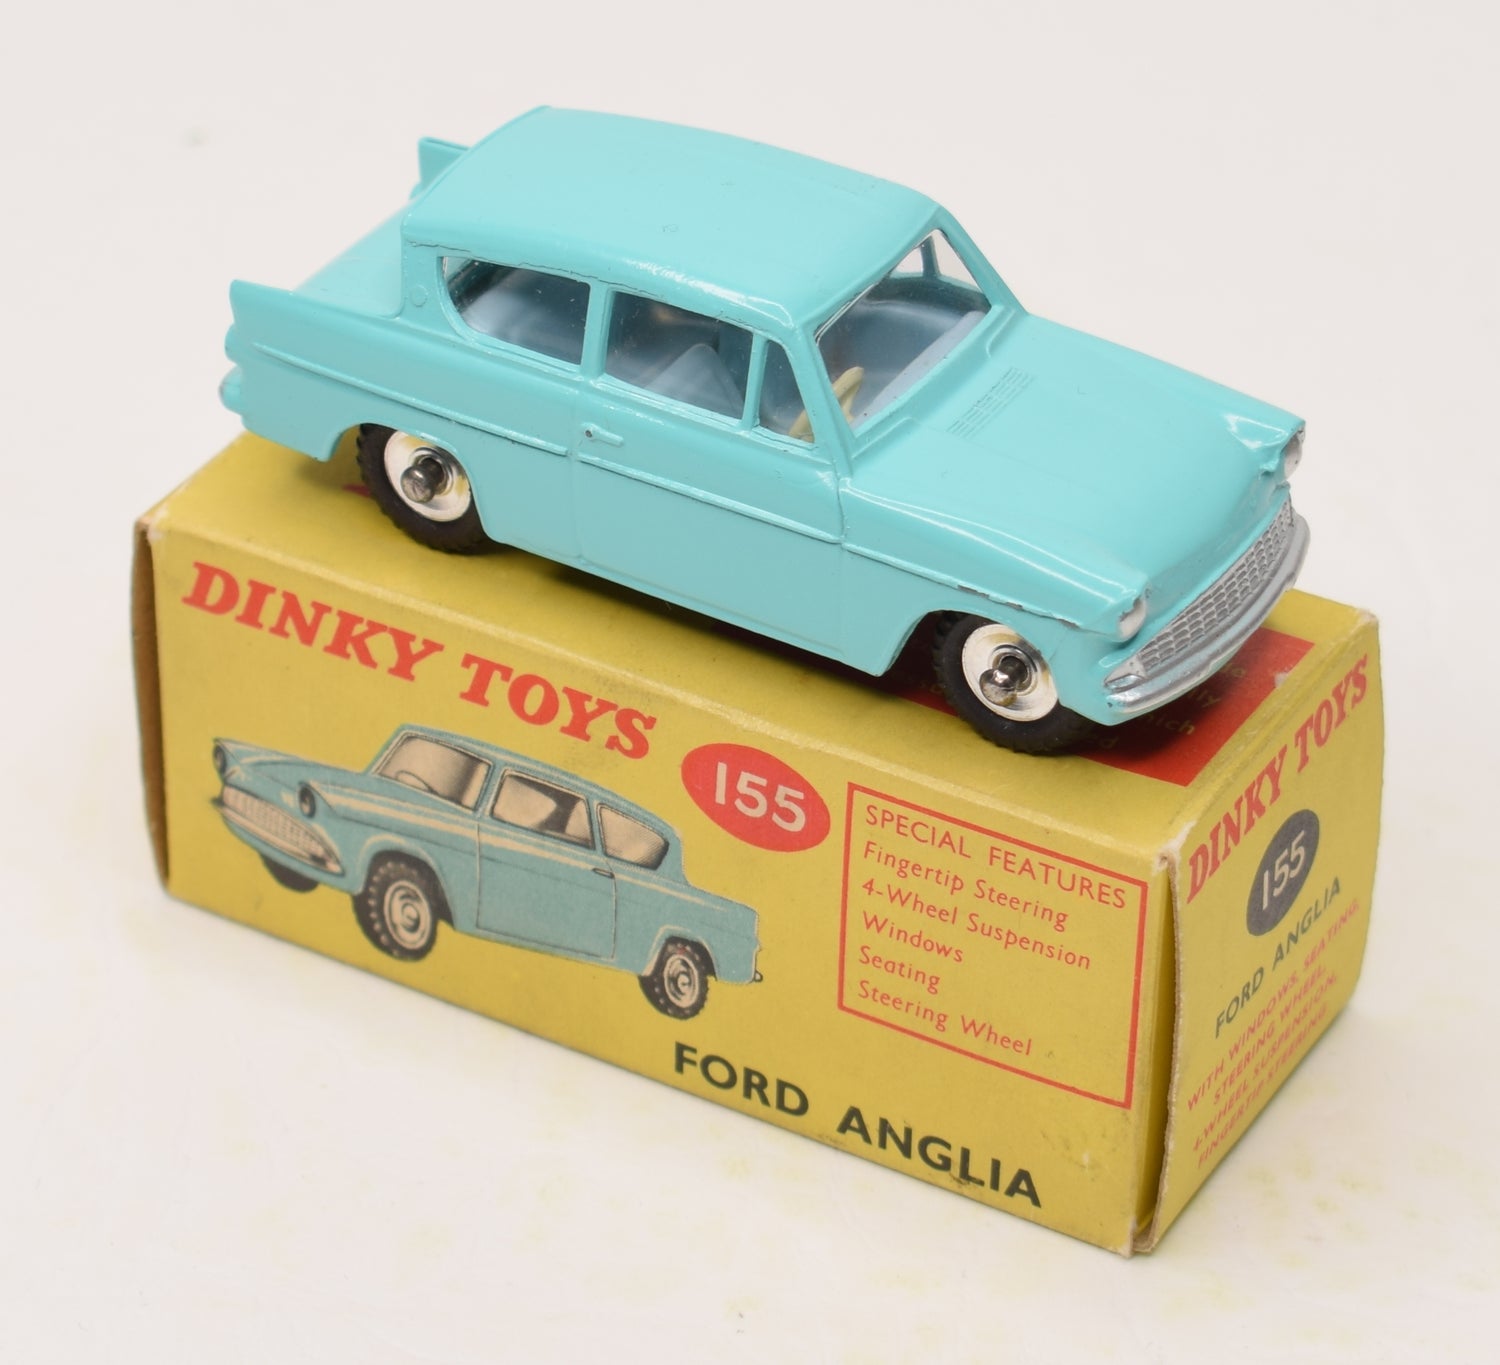 Dinky toys 155 Ford Anglia Very Near Mint/Boxed 'Cotswold' Collection Part 2